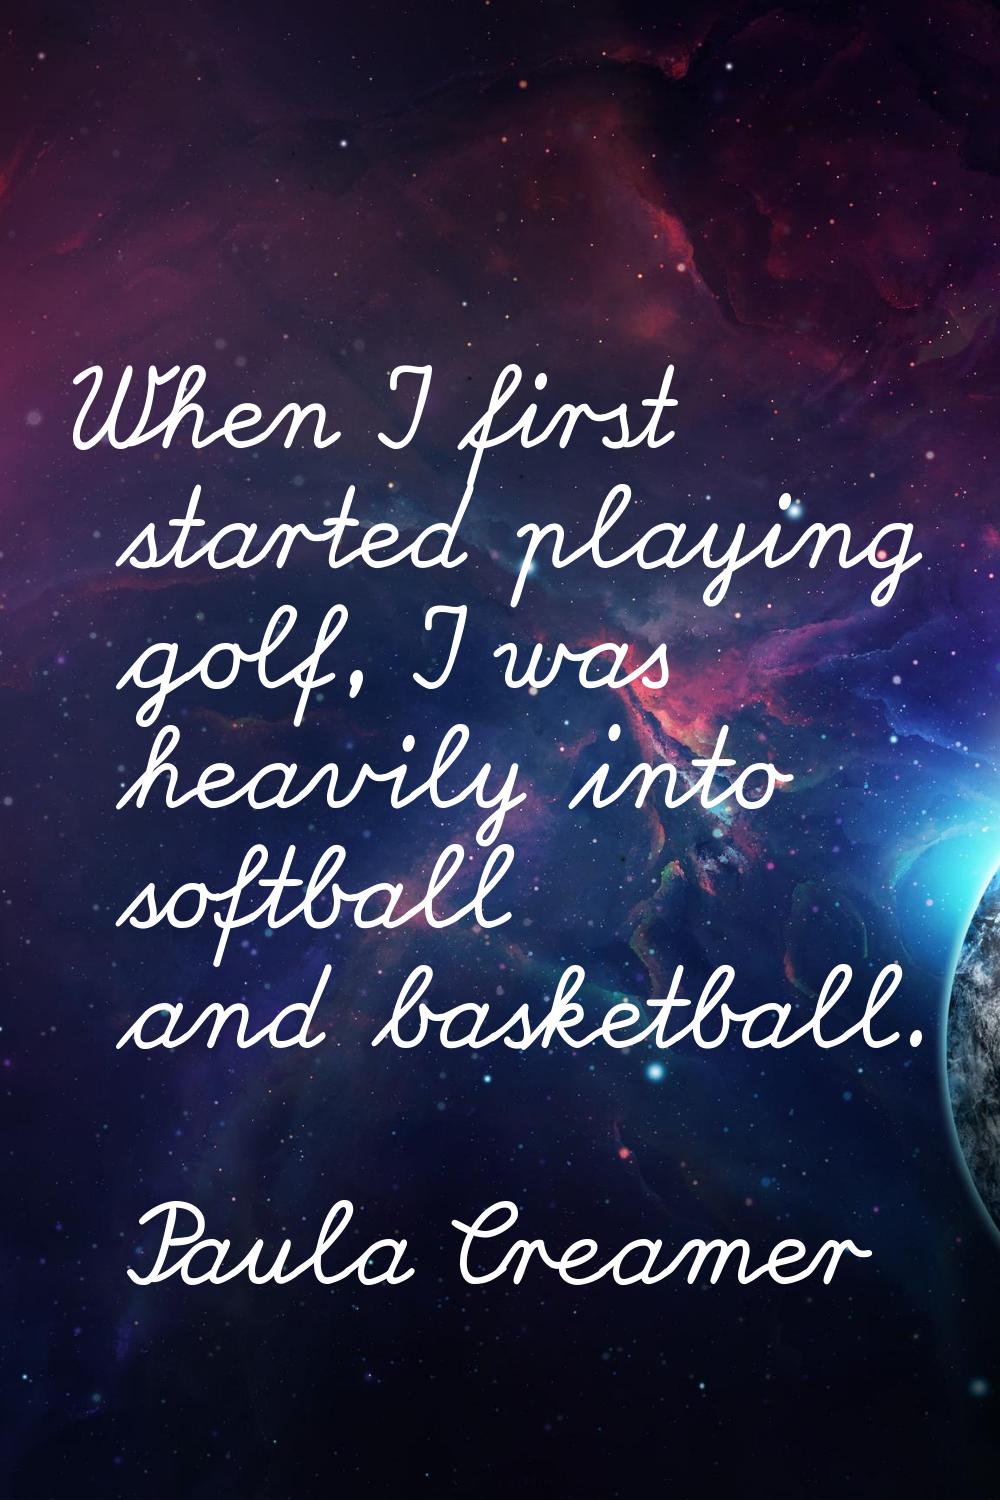 When I first started playing golf, I was heavily into softball and basketball.